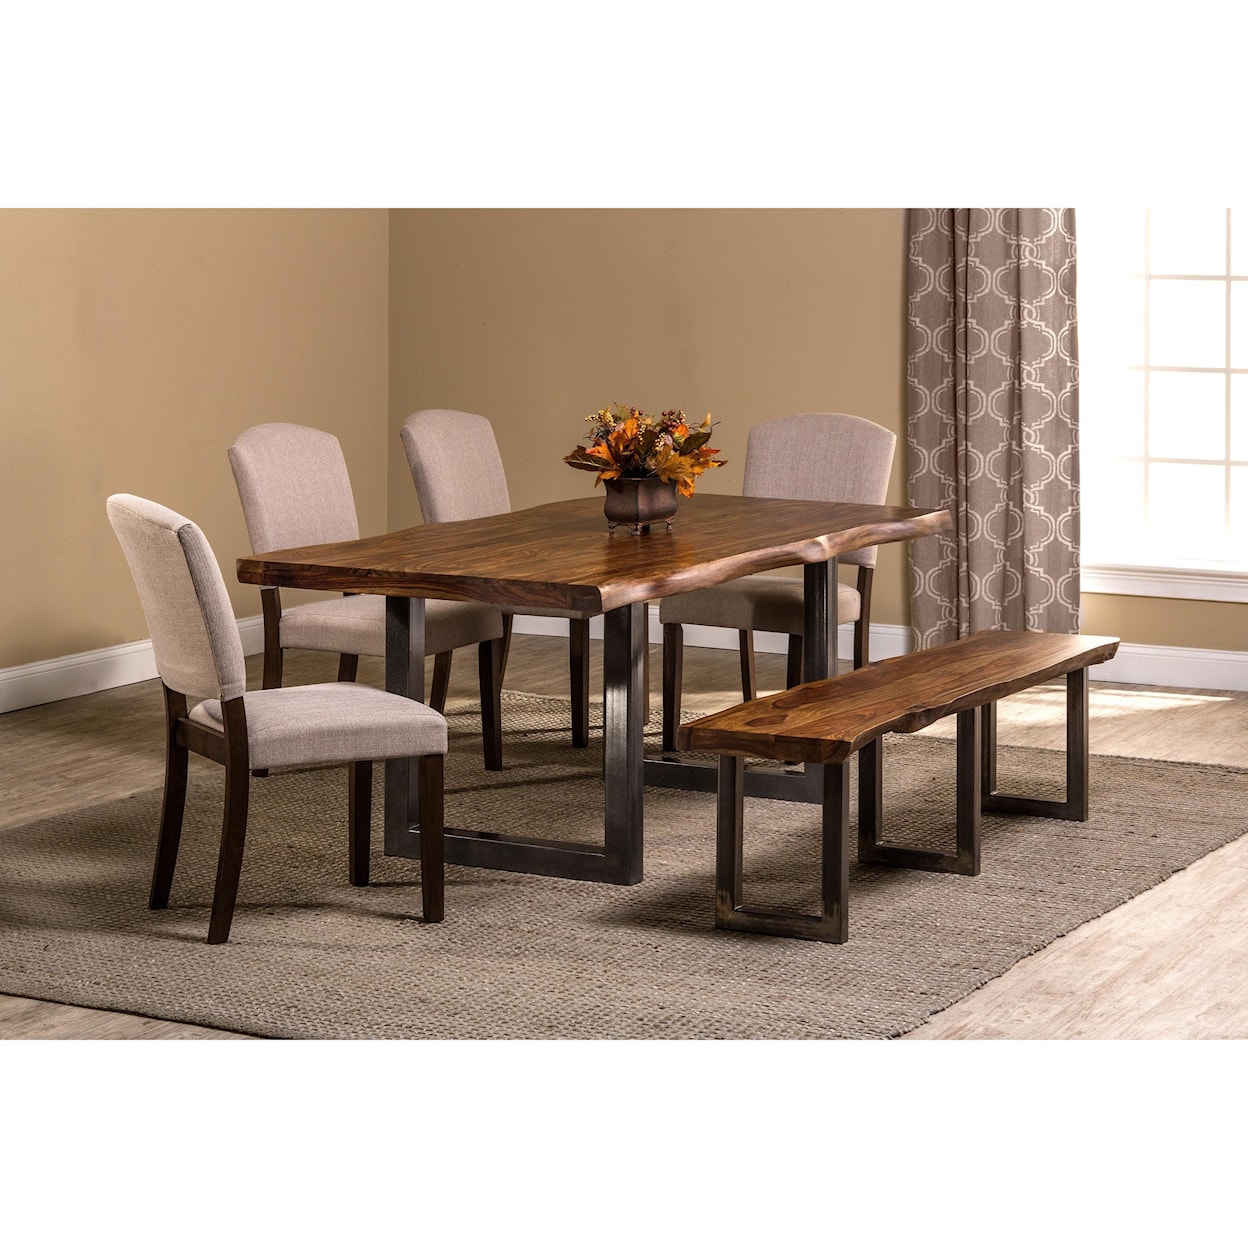 Hillsdale Emerson 6-Piece Rectangle Dining Set